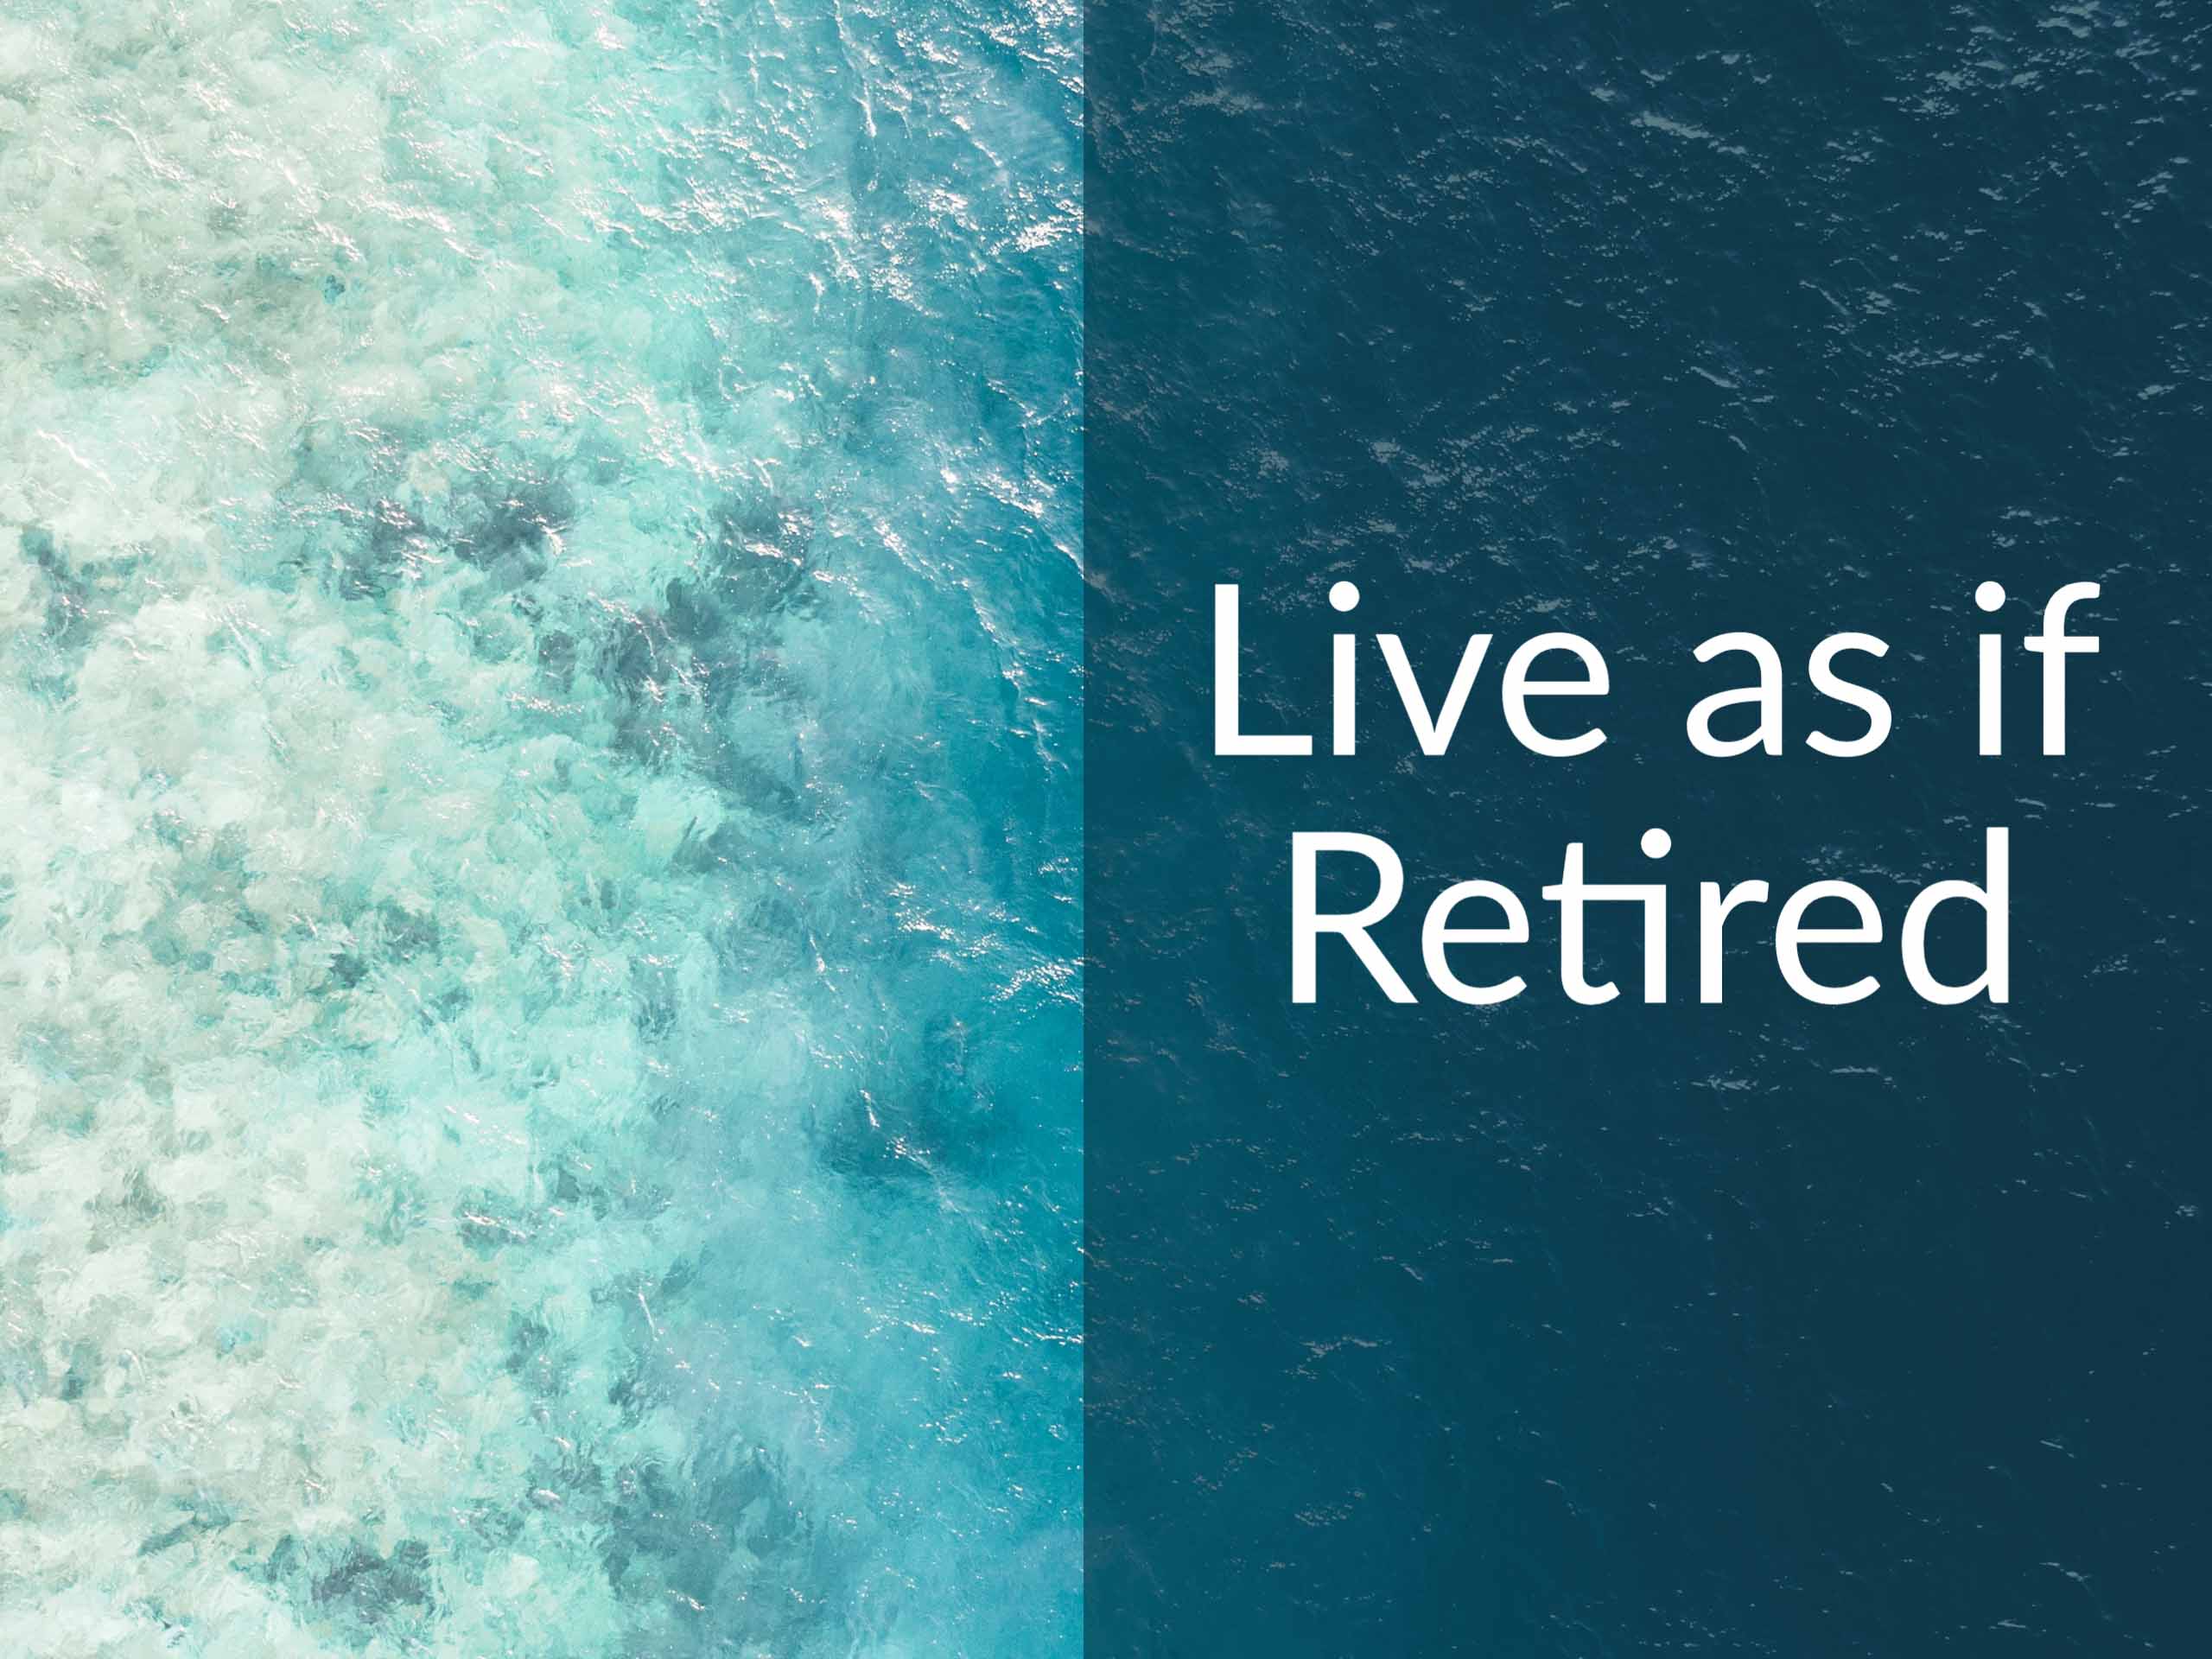 The ocean with the caption "Live as if Retired"